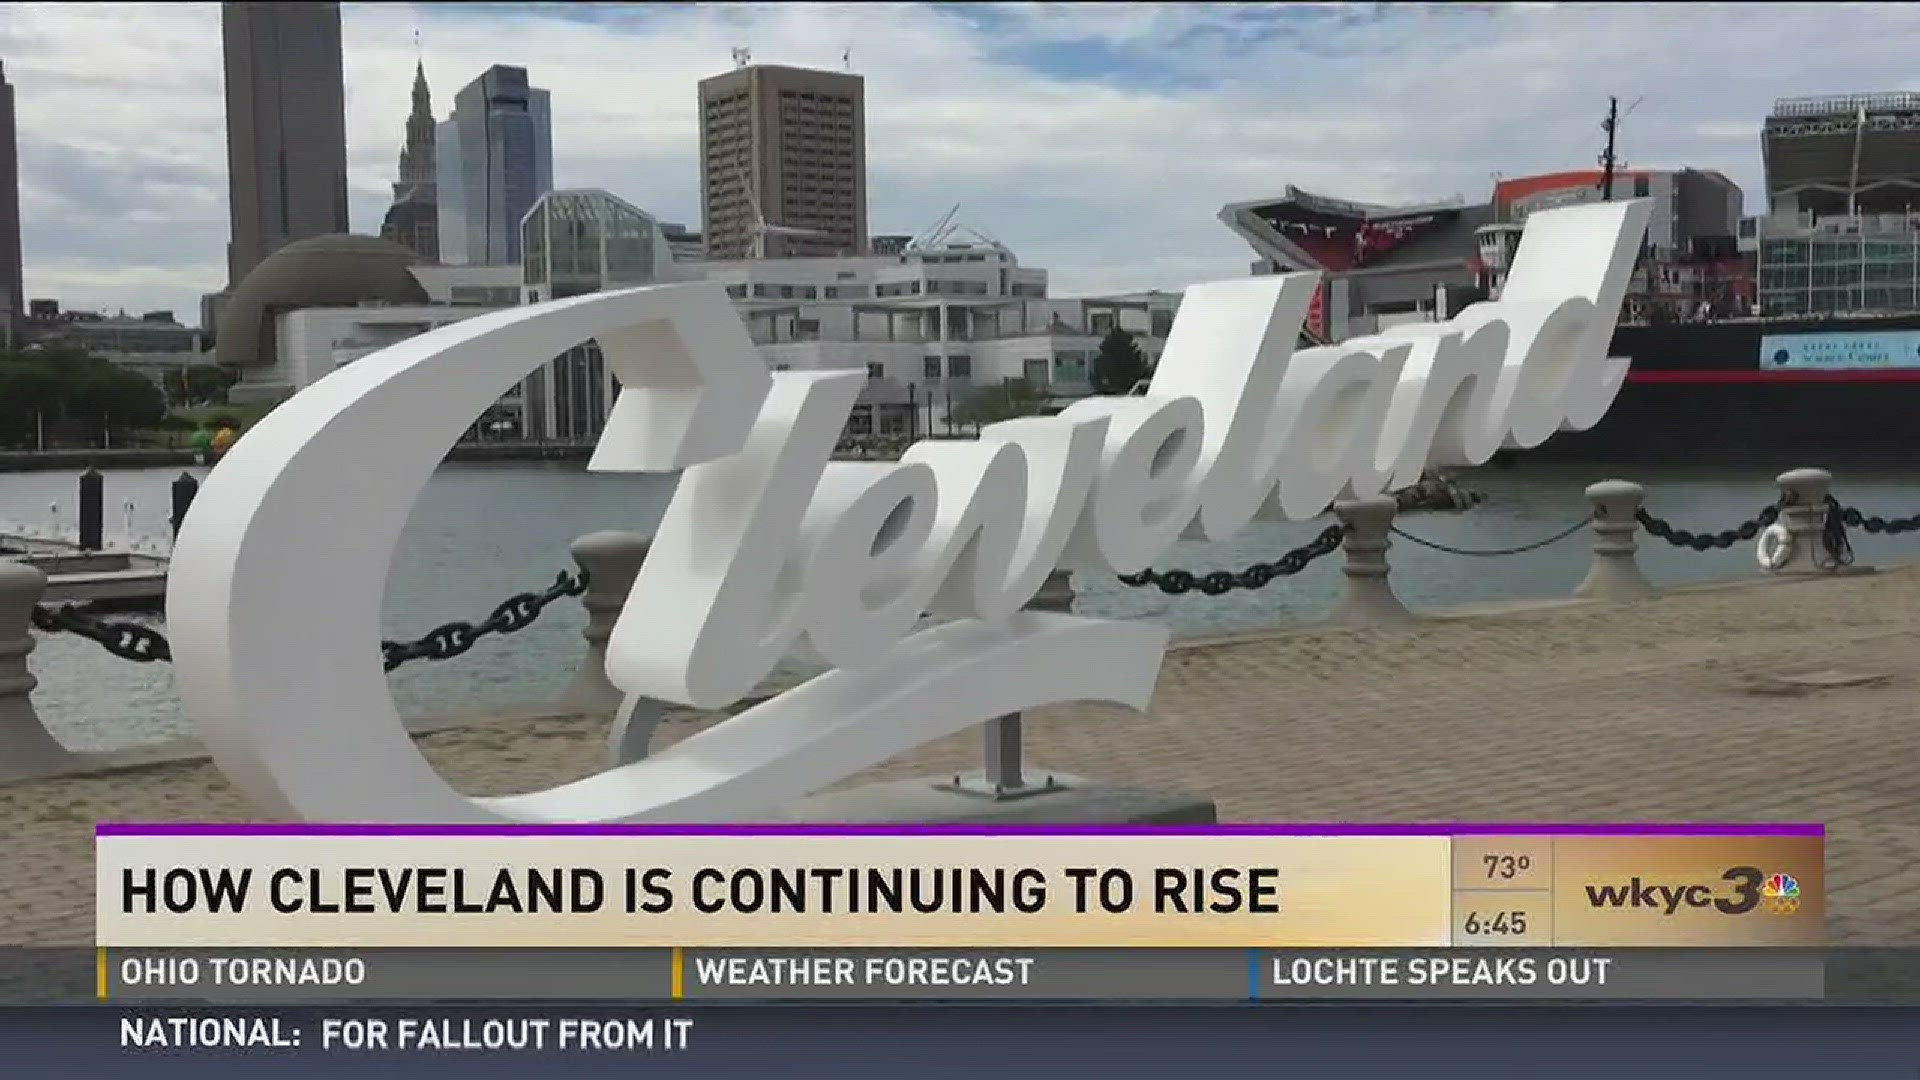 The City of Cleveland continues to rise and prosper along the shores of Lake Erie